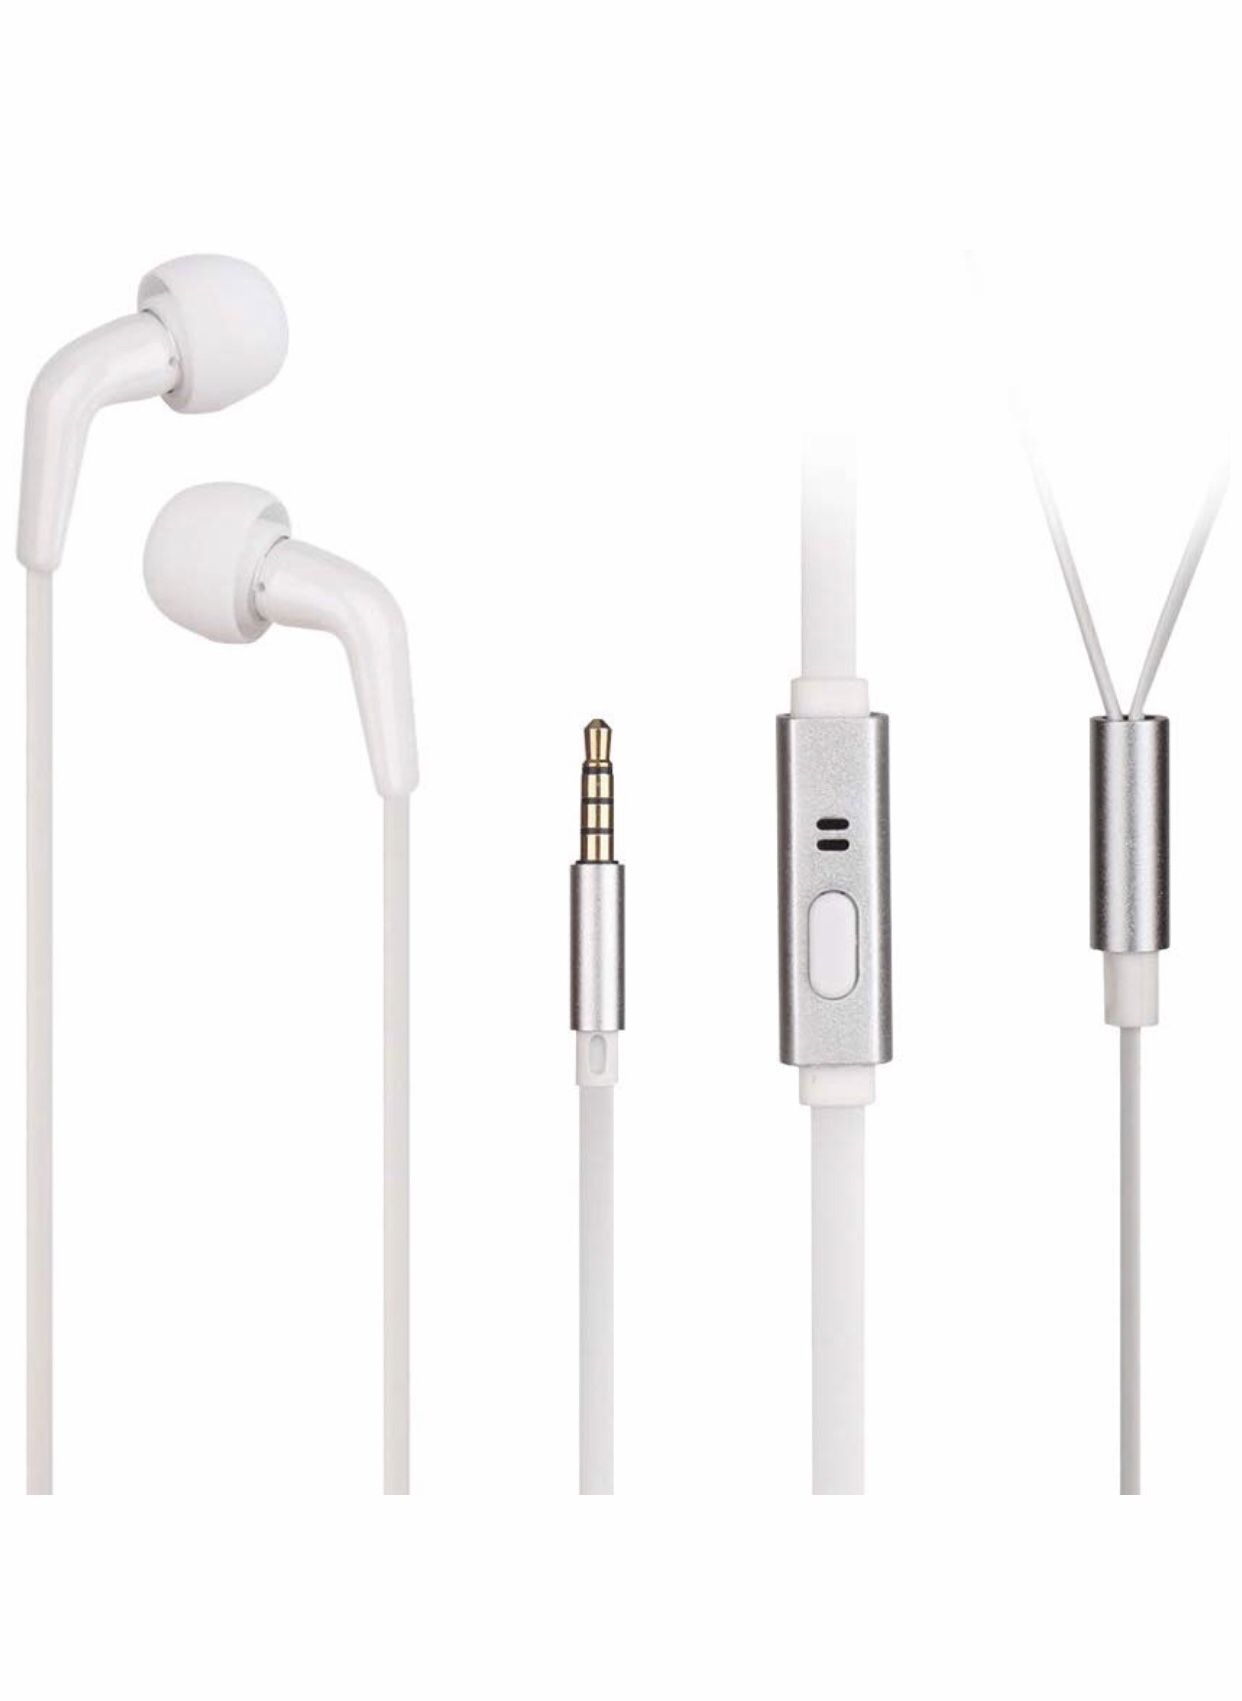 Brand new Ceramic in-Ear Earbuds Heaphones Headset with Mic Microphone Stereo Bass with 3.5mm Jack, Features & details 【Comfortable Design】 The desig